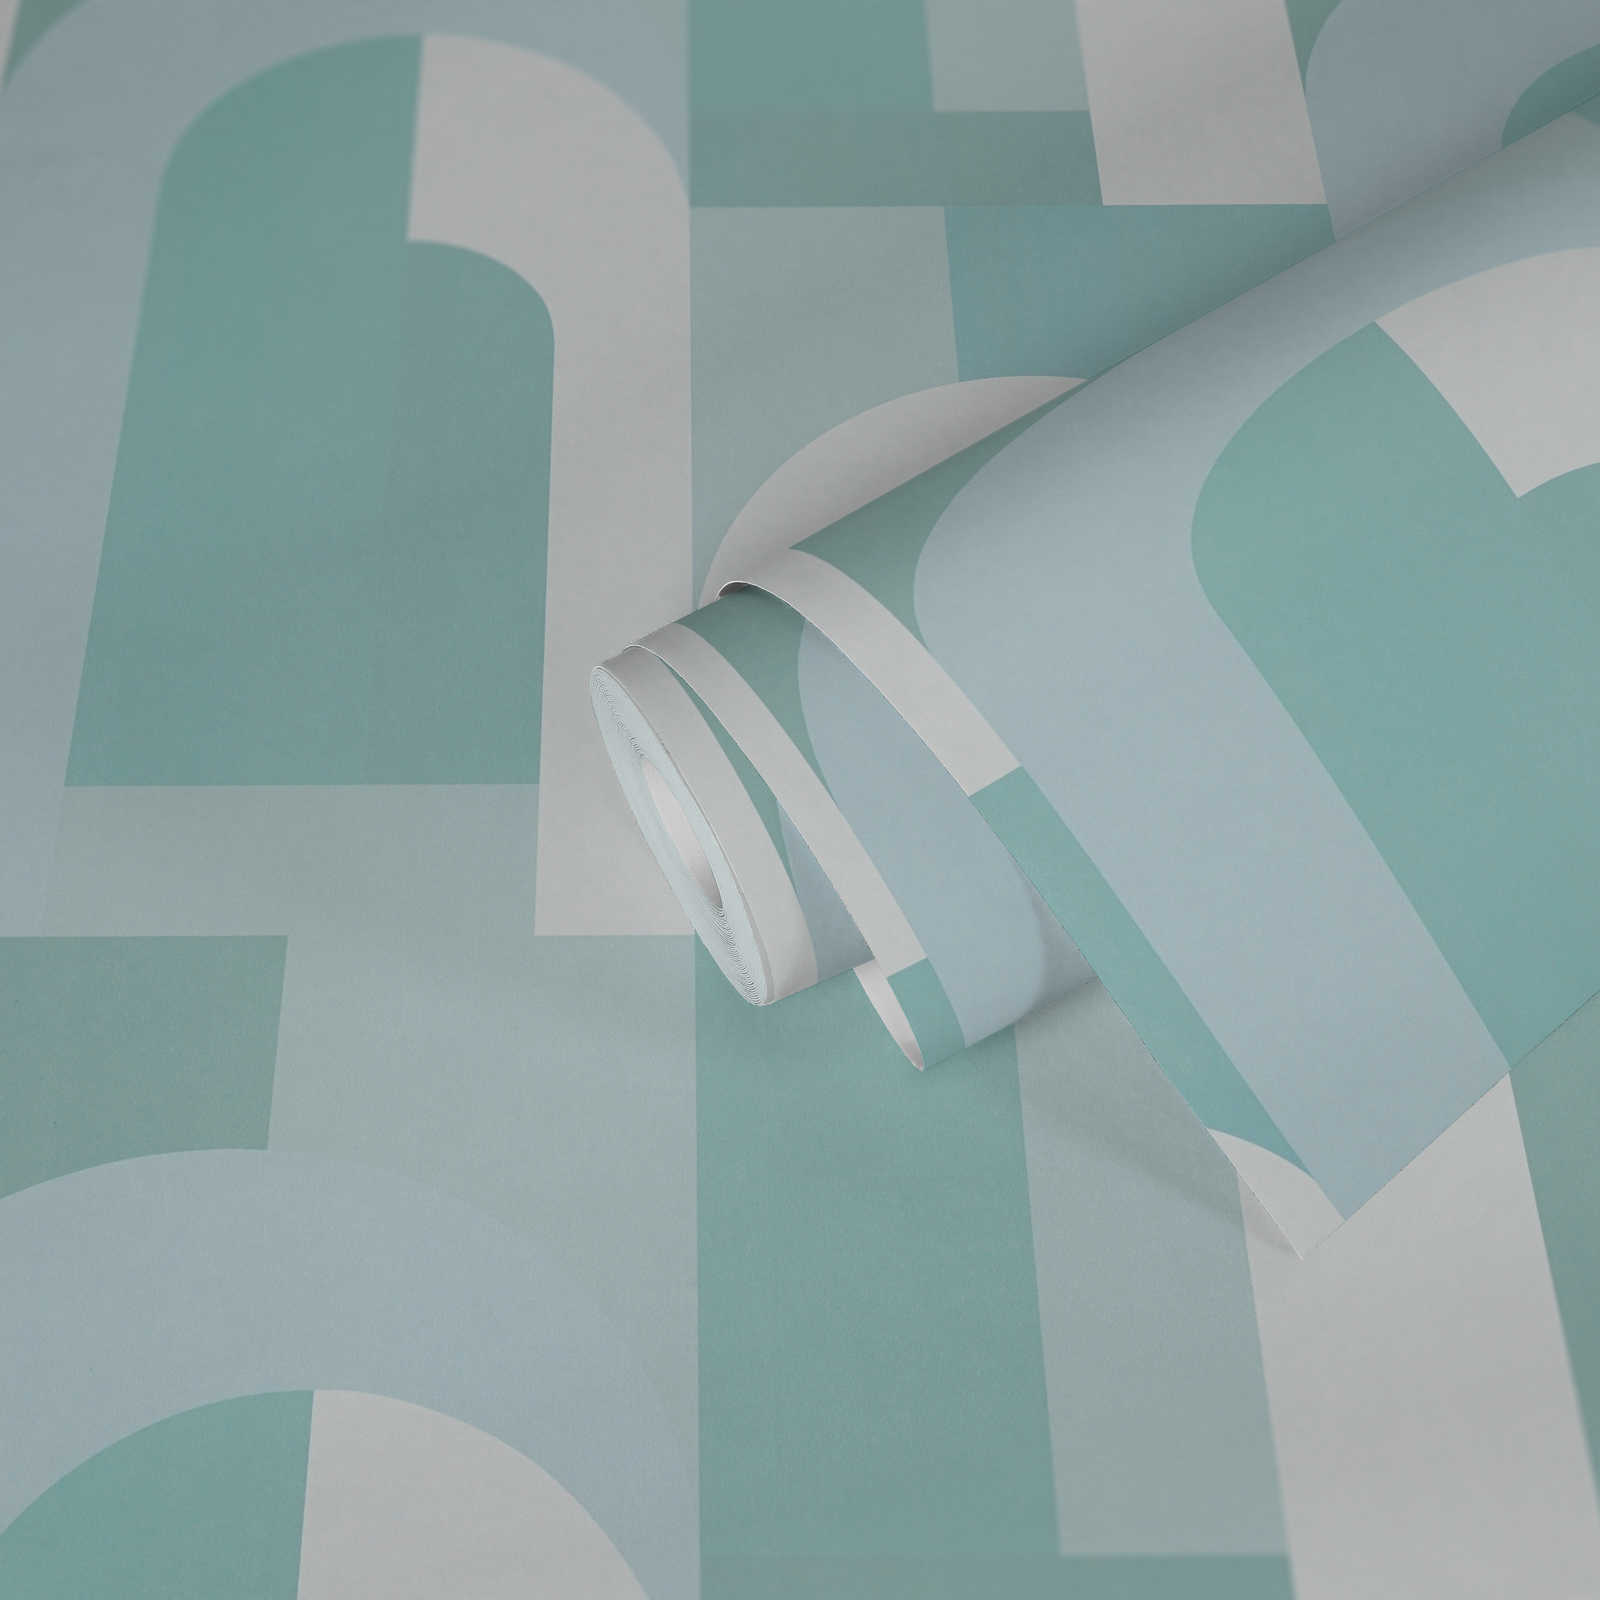             Graphic wallpaper with bow pattern - turquoise, white
        